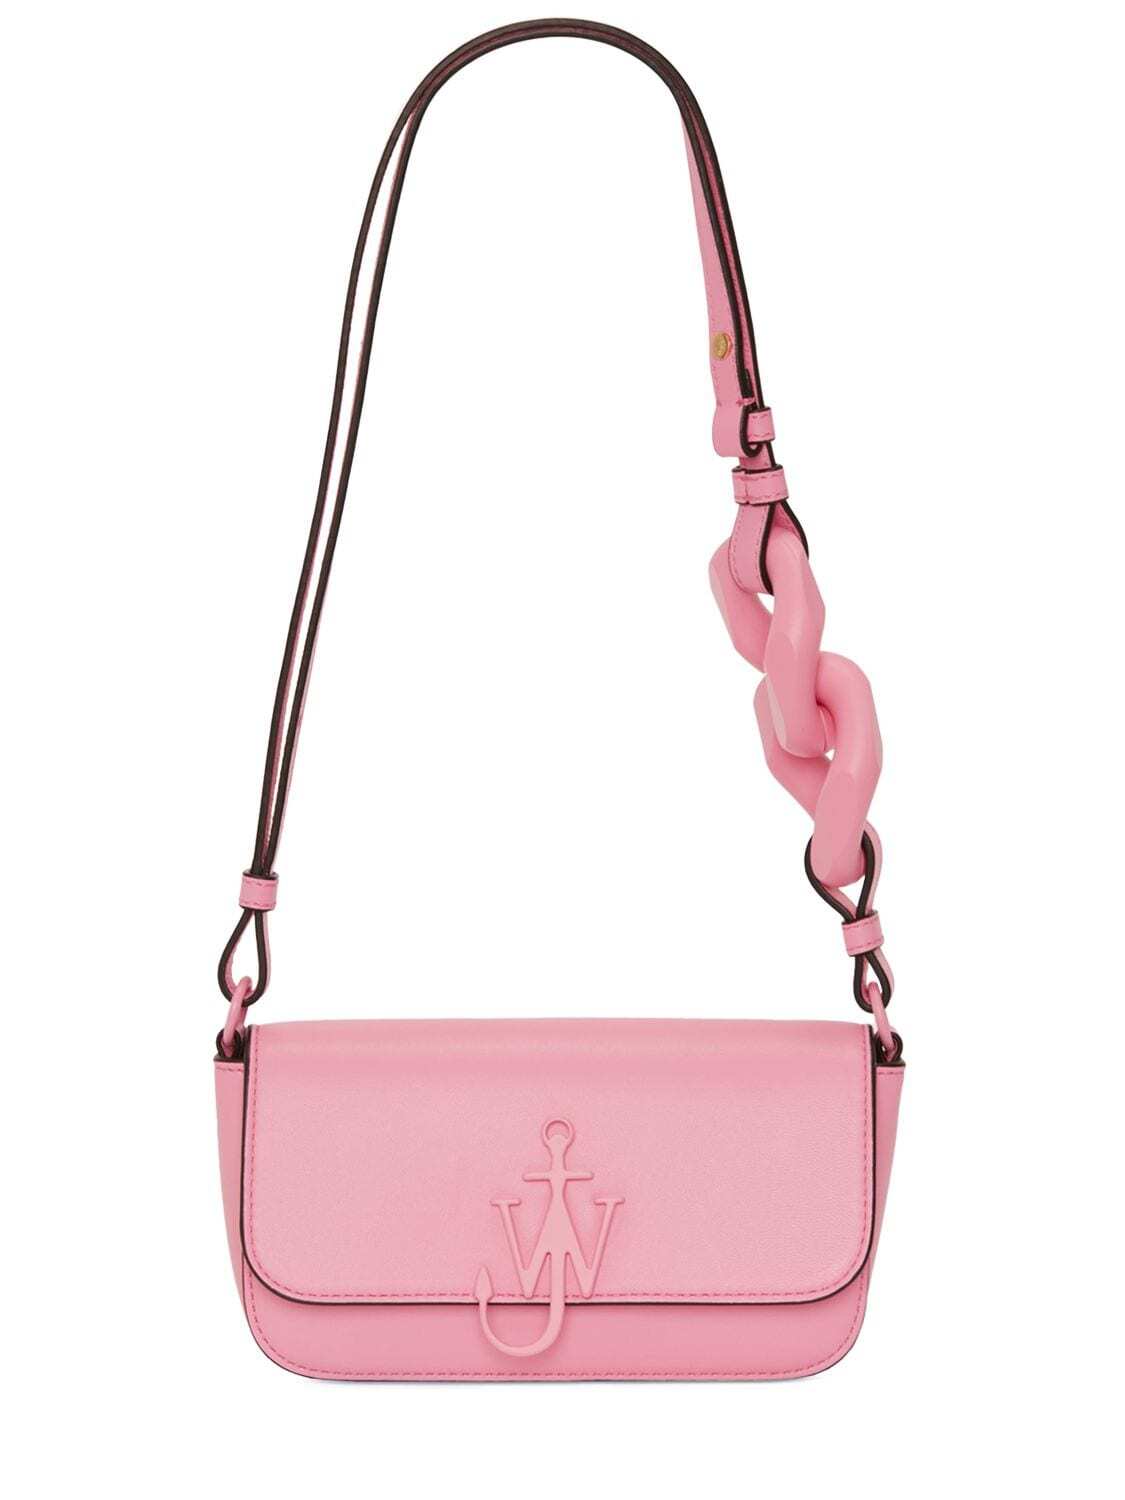 JW ANDERSON Tonal Chain Baguette Anchor Leather Bag in pink